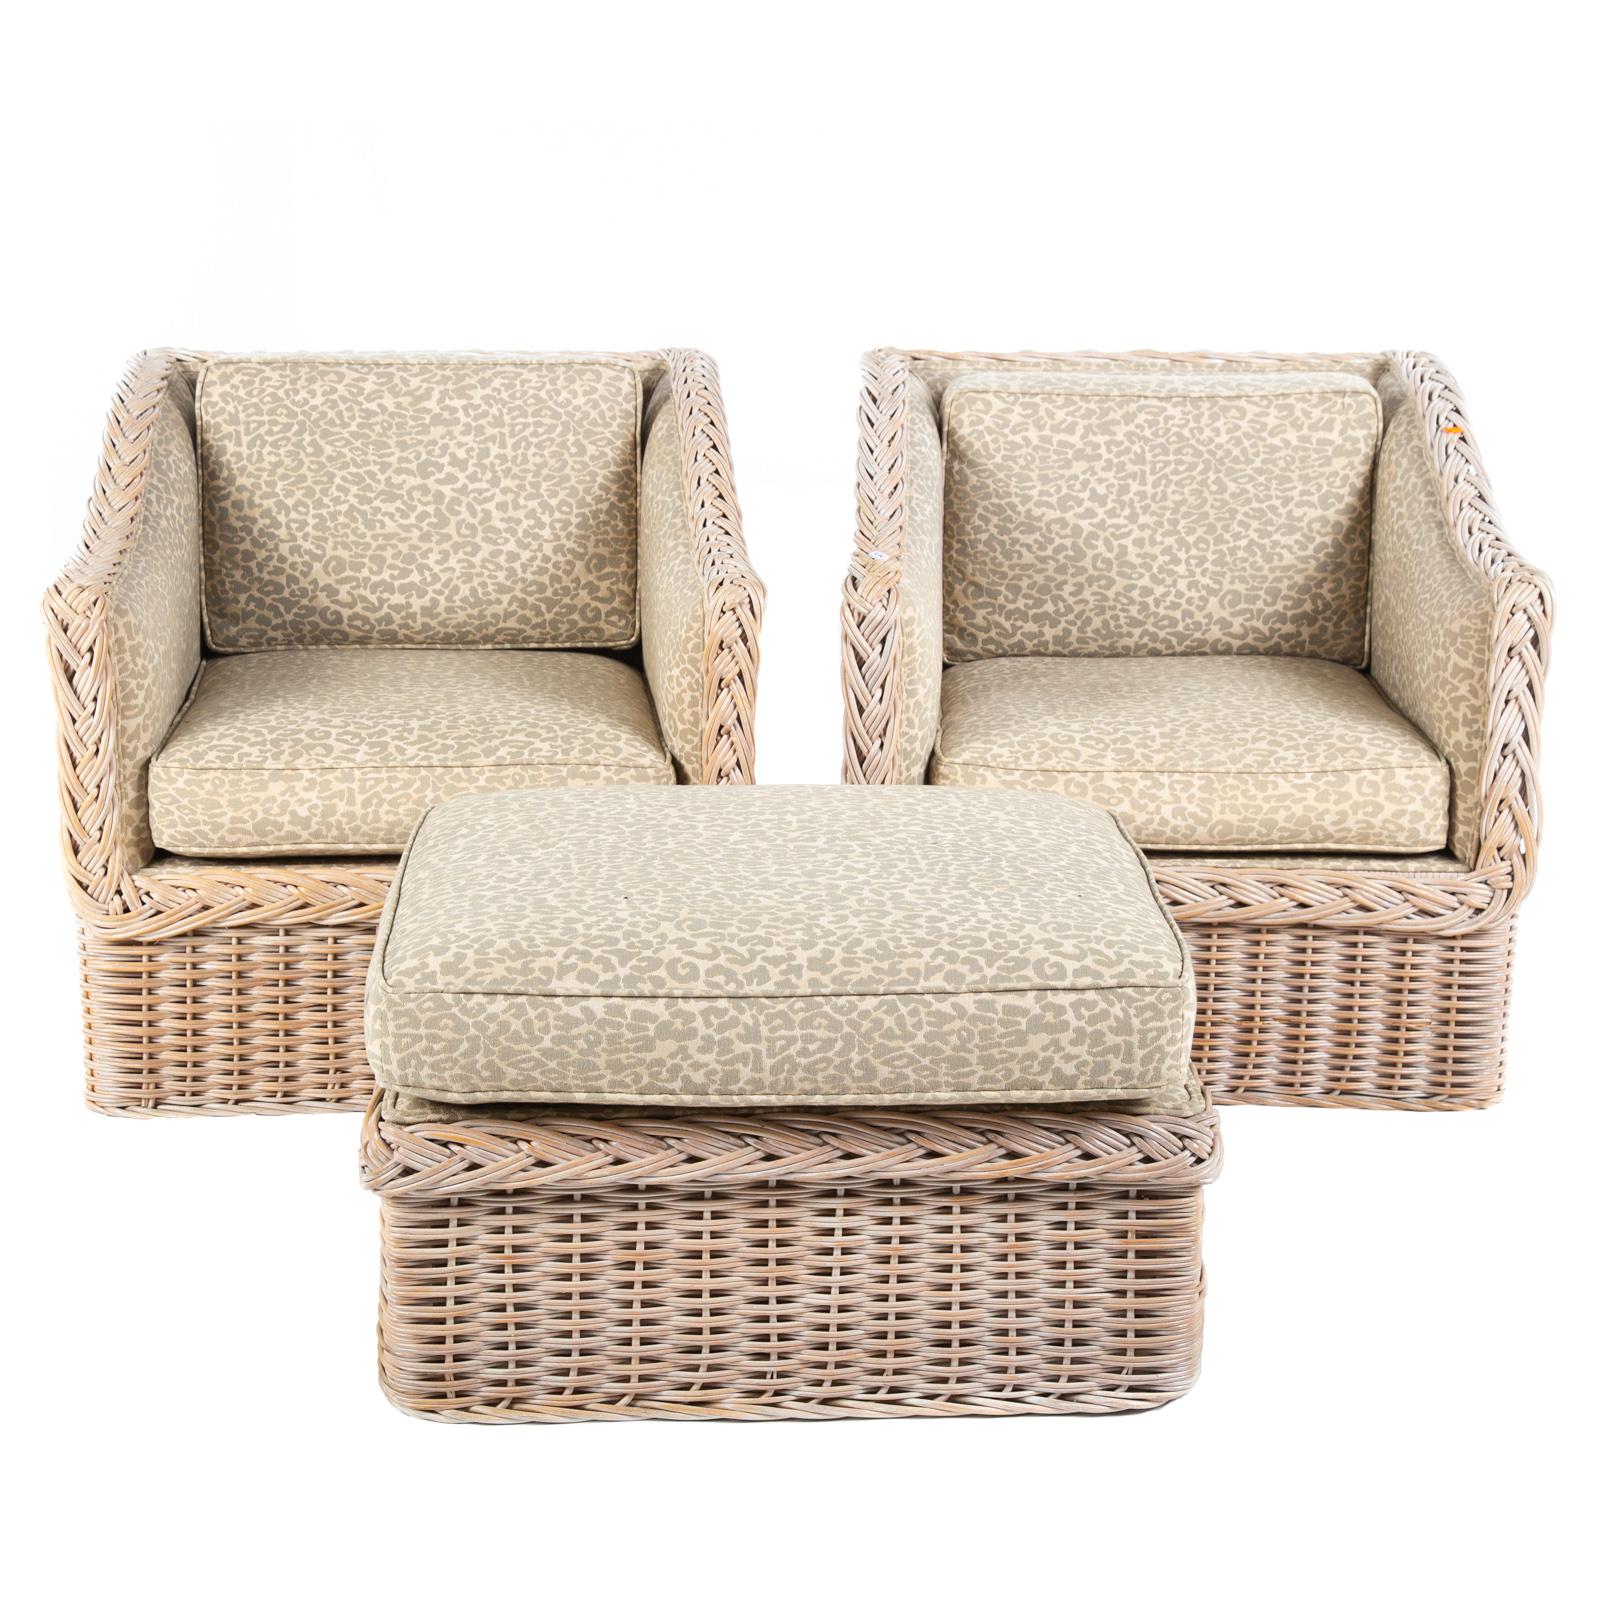 A PAIR OF WICKER UPHOLSTERED CHAIRS 3b296e